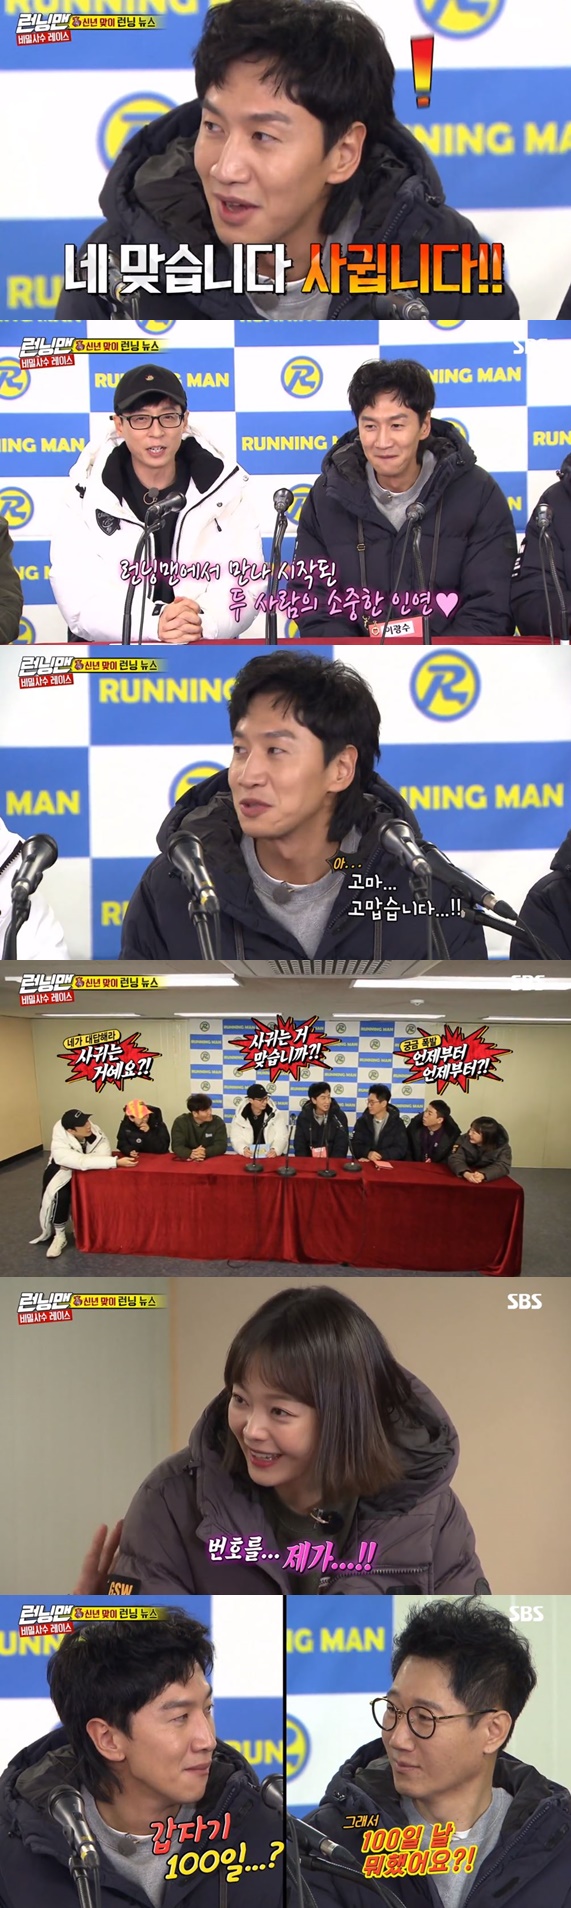 Lee Sun-bin and Lee Kwang-soo, who are in public devotion, expressed their hearts.On SBS entertainment program Running Man, which aired on the 13th, it was shown that the cast members were talking about the current situation.On this day, the members placed Lee Kwang-soo in the middle to ask about Lee Kwang-soos devotion news.While everyone was hesitant to open their mouths, Haha laughed at the news of Lee Kwang-soo and Lee Sun-bins devotion, saying, Yes, I live.Lee Sun-bin and Lee Kwang-soo, who were guests on Running Man, became lovers, said MC Yoo Jae-Suk.When asked about his feelings, Lee Kwang-soo said, In fact, the most worrying thing about the article was what to do on Monday (Running Man shooting day).I will cross the big mountain today, he said. Thank you. I want to be proud of something, and I am the erroneous love, said Jeon So-min, and I gave you the number.Ji Suk-jin asked, What did you do on 100 days? Lee Kwang-soo replied, I did not do anything special because it was not a style to take such a thing.Meanwhile, Lee Kwang-soo officially acknowledged his devotion to Lee Sun-bin on December 31 last year, and the agency explained that they had been together for five months.Photo: SBS Running Man broadcast capture